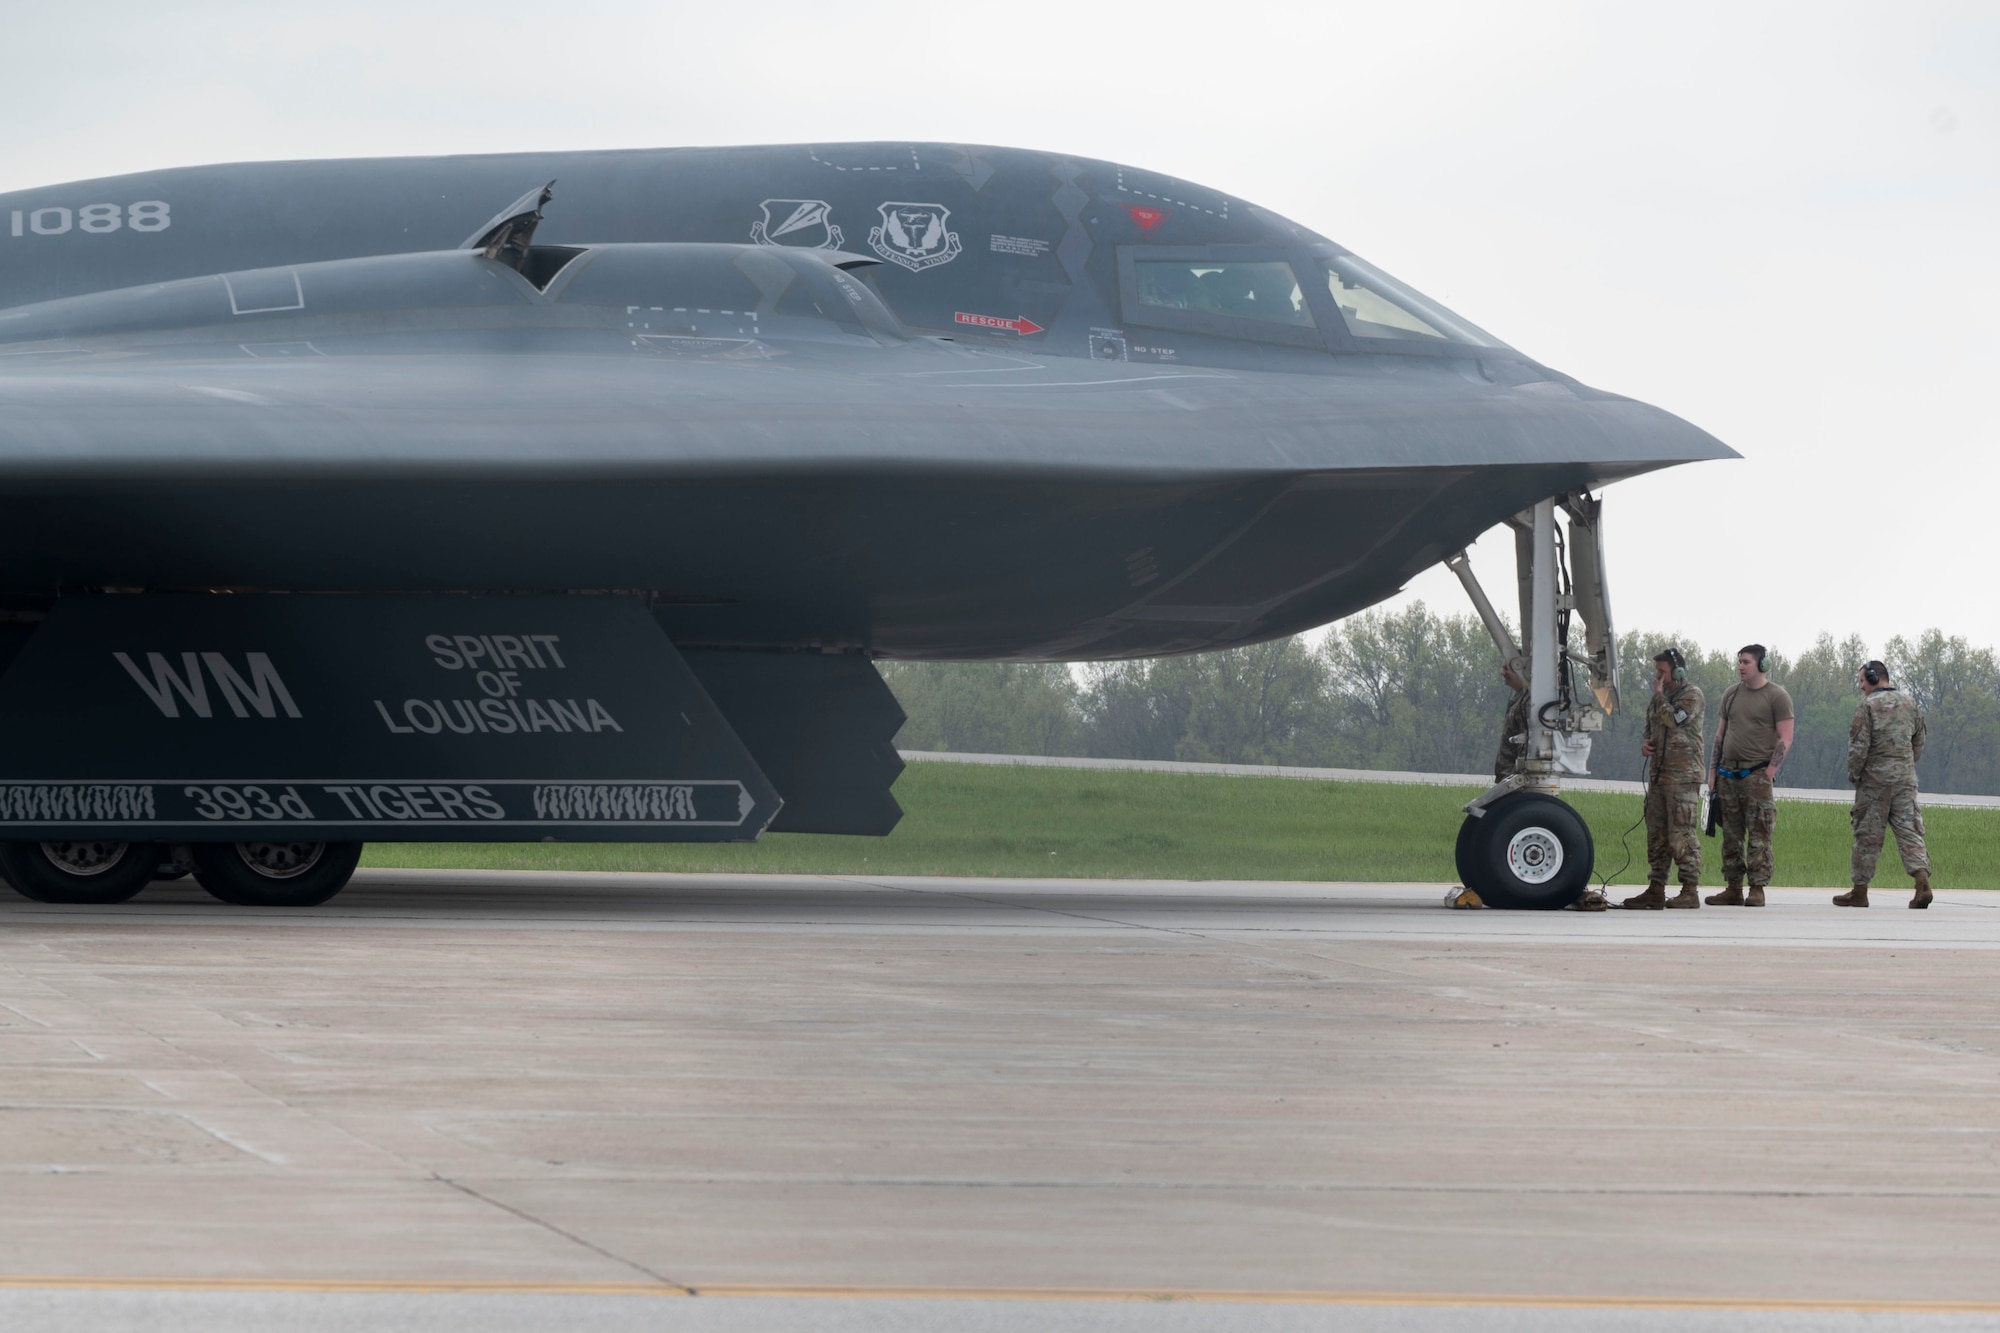 A B-2 Spirit stealth bomber assigned to the 509th Bomb Wing receives maintenance prior to takeoff at Whiteman Air Force Base, Mo., April 15, 2024. Spirit Vigilance is one of a series of routine exercises held by Air Force Global Strike bases across the Air Force that focus on the training and readiness of Airmen. These exercises are regularly planned and are conducted to continuously evaluate and enhance U.S. deterrence capabilities. (U.S. Air Force photo by Tech. Sgt. Anthony Hetlage)